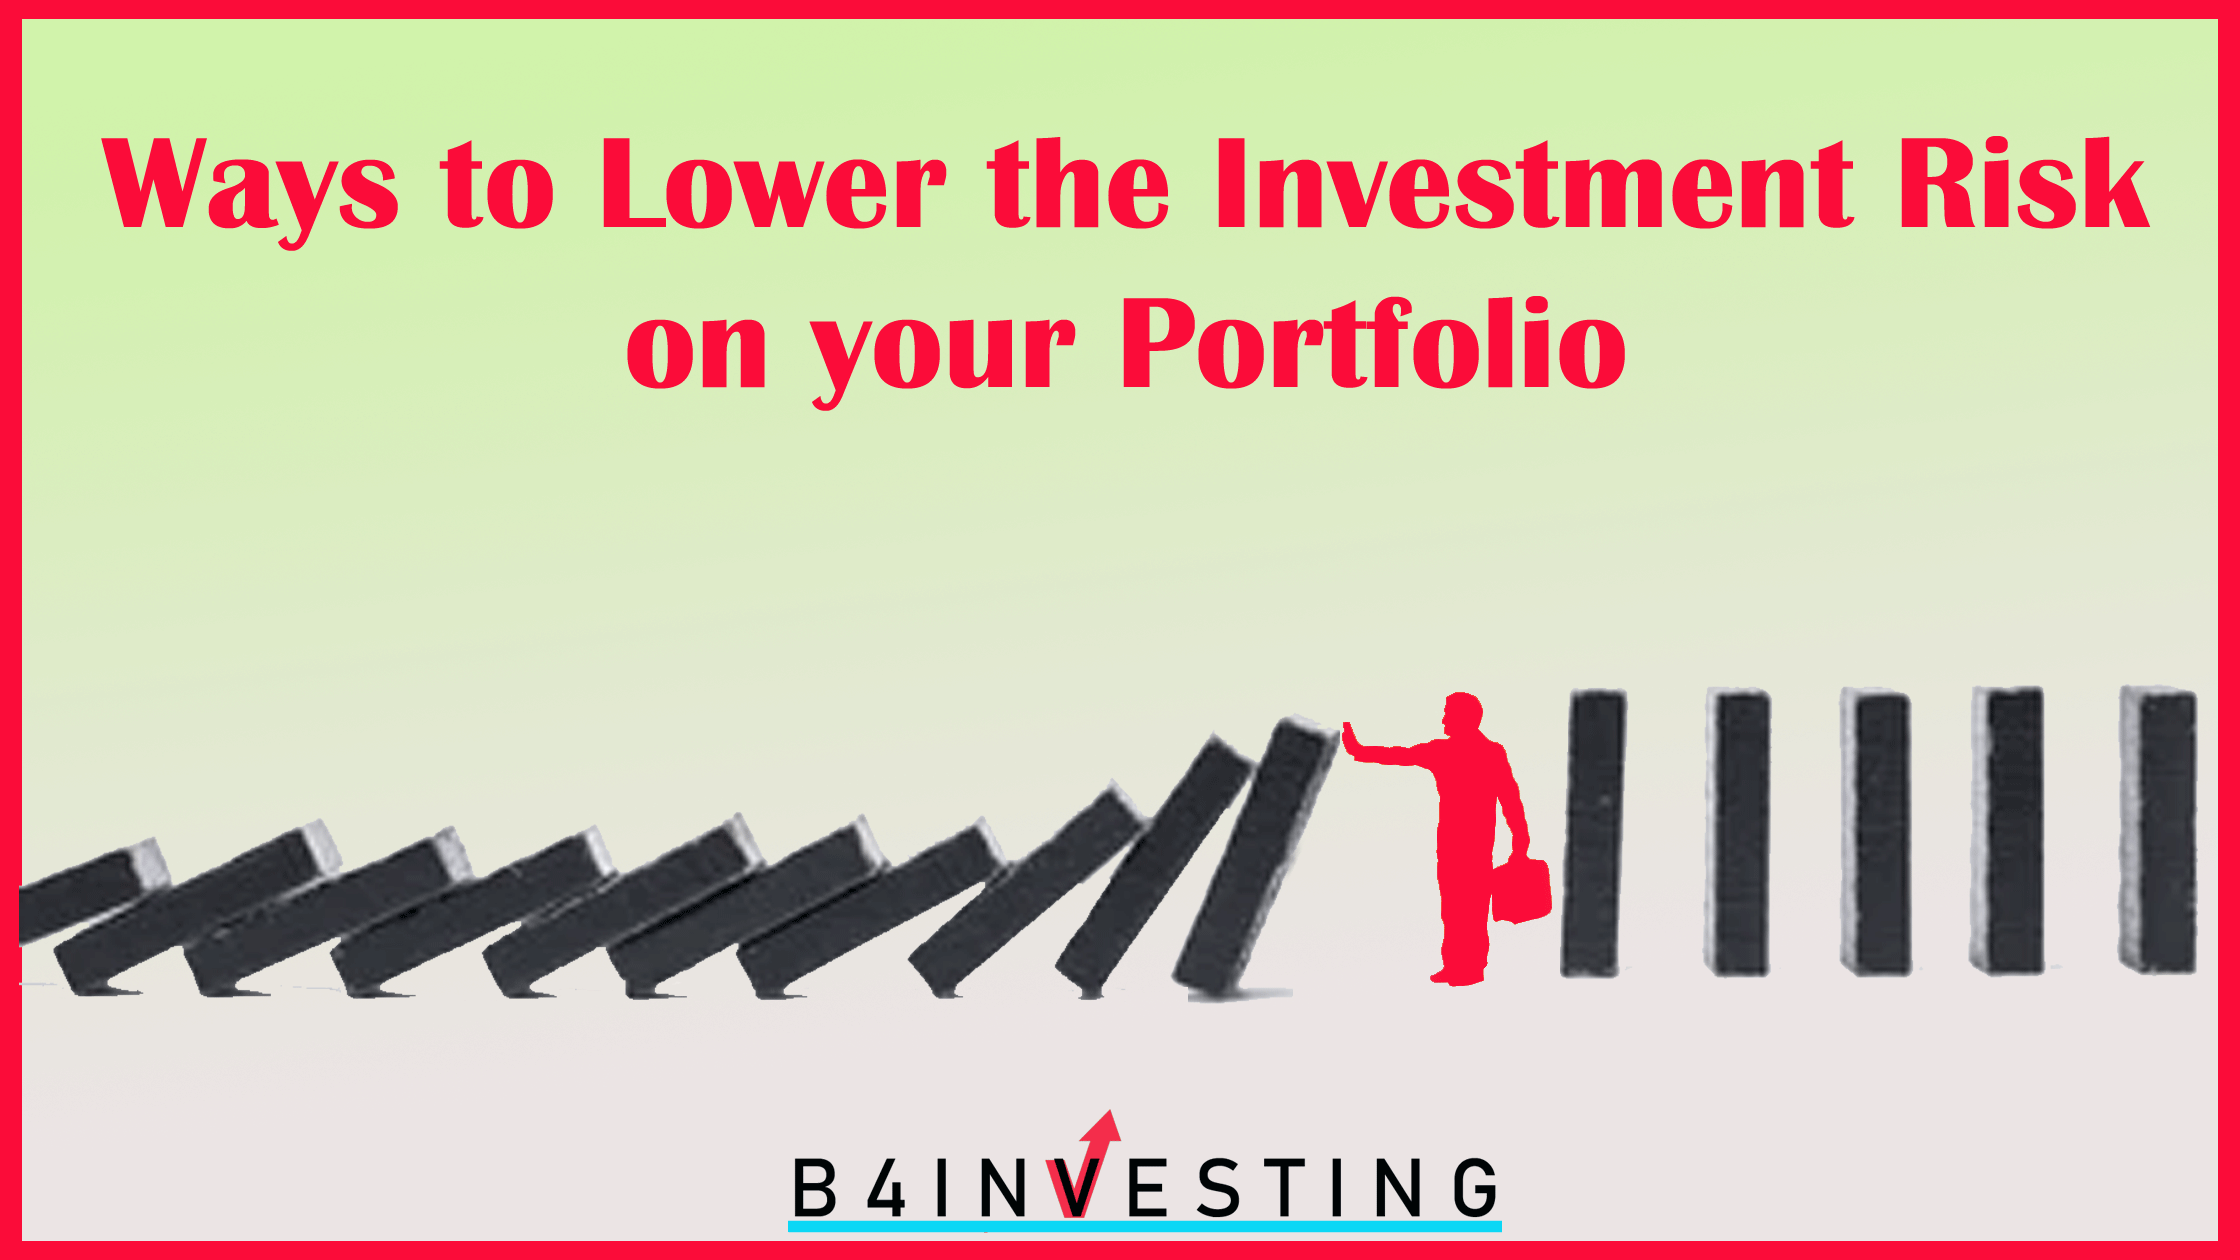 Ways to reduce Investment Risk on your Portfolio